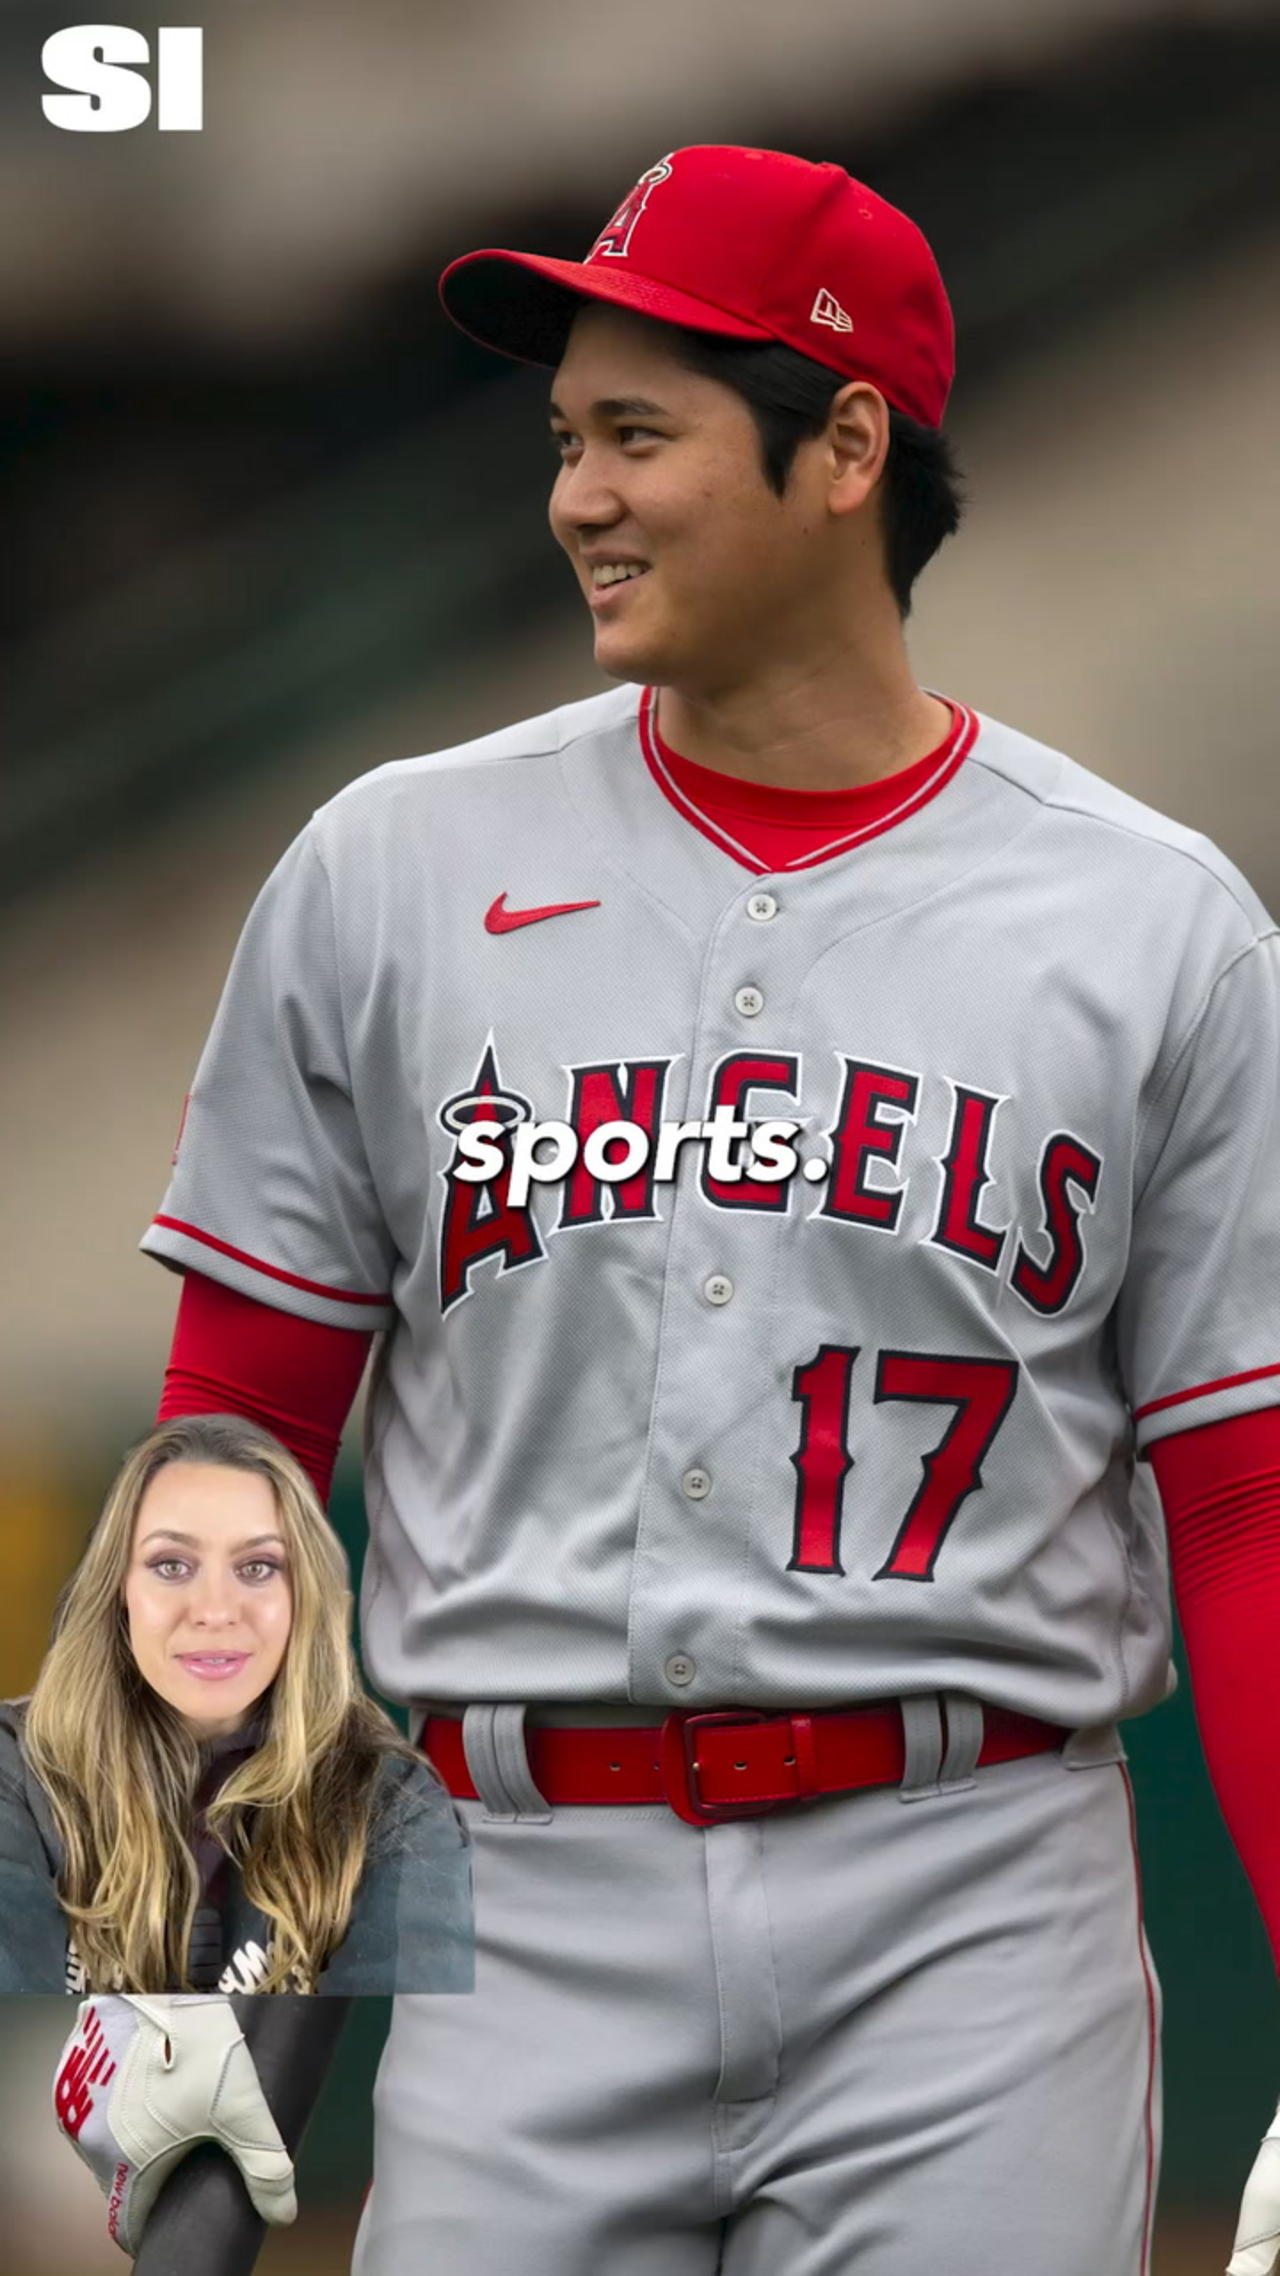 New Details About Shohei Ohtani’s Historic Contract